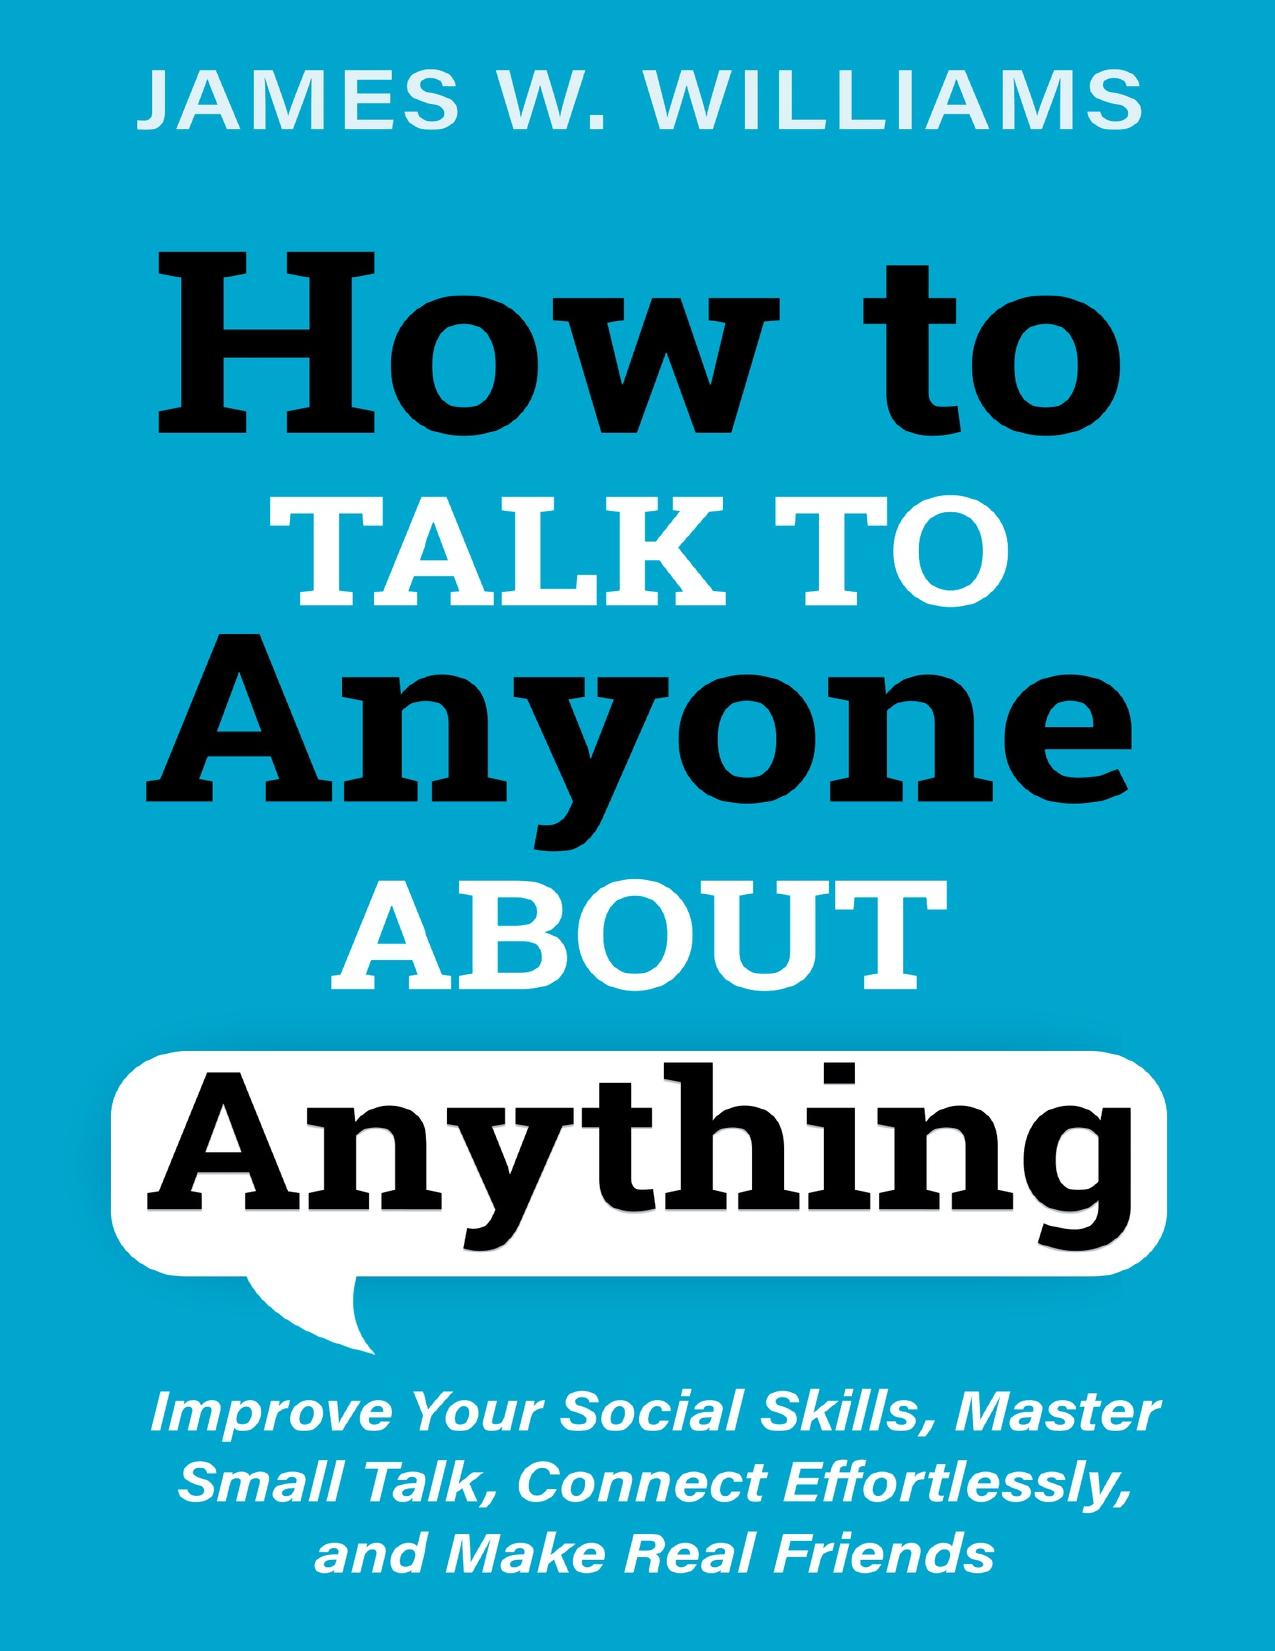 How to Talk to Anyone About Anything: Improve Your Social Skills, Master Small Talk, Connect Effortlessly, and Make Real Friends (Communication Skills Training Book 7) by W. Williams James